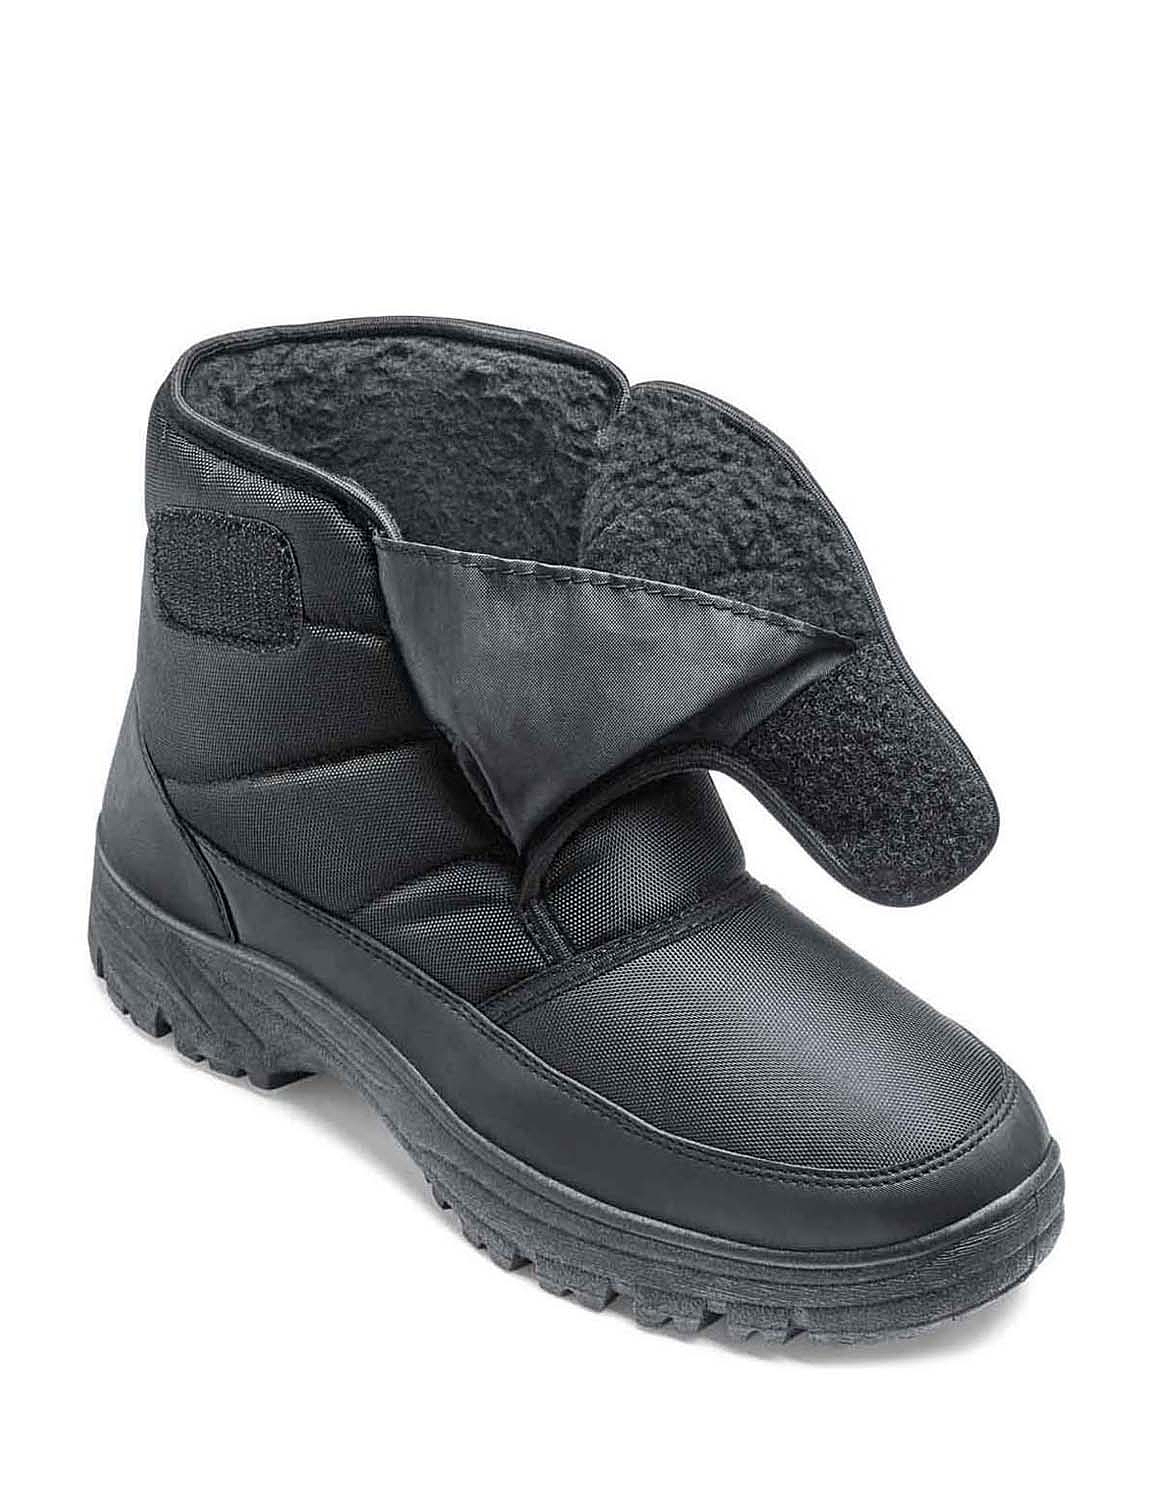 mens wide width snow boots